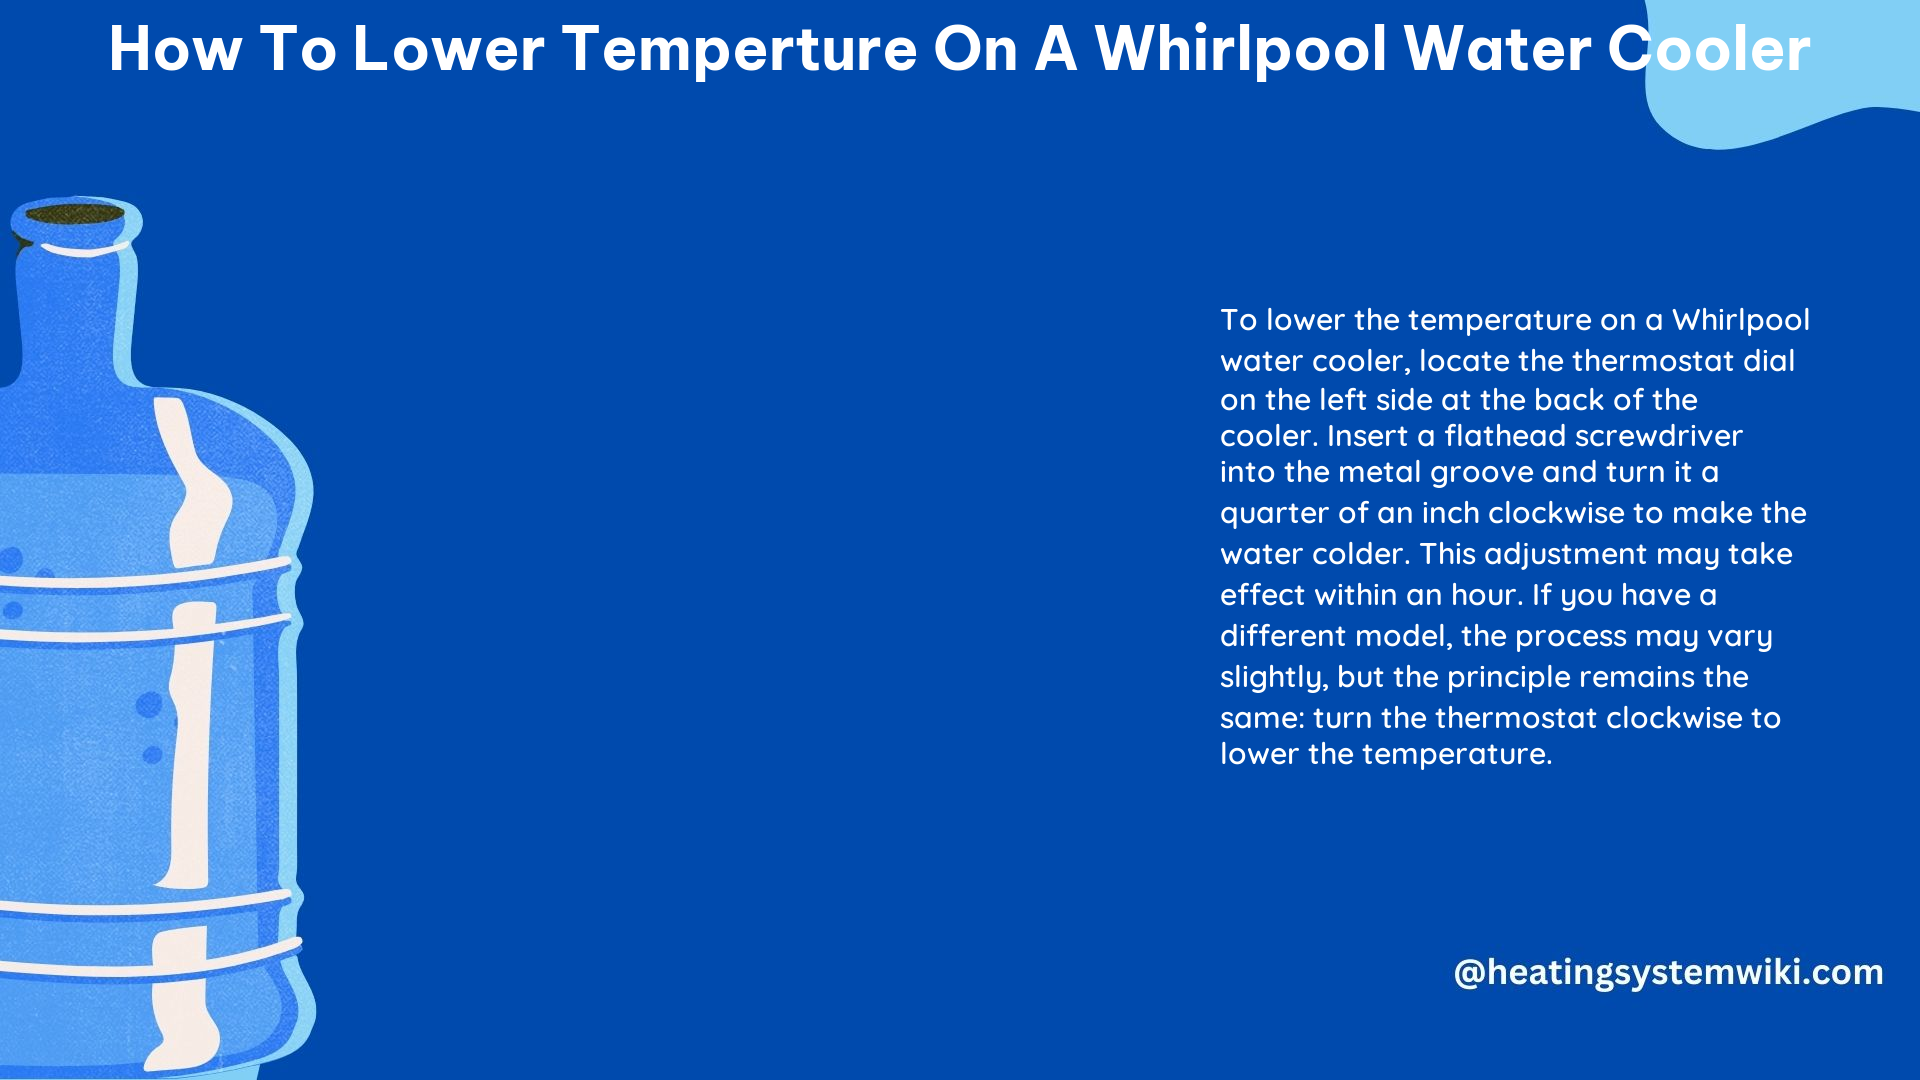 How to Lower Temperture on a Whirlpool Water Cooler